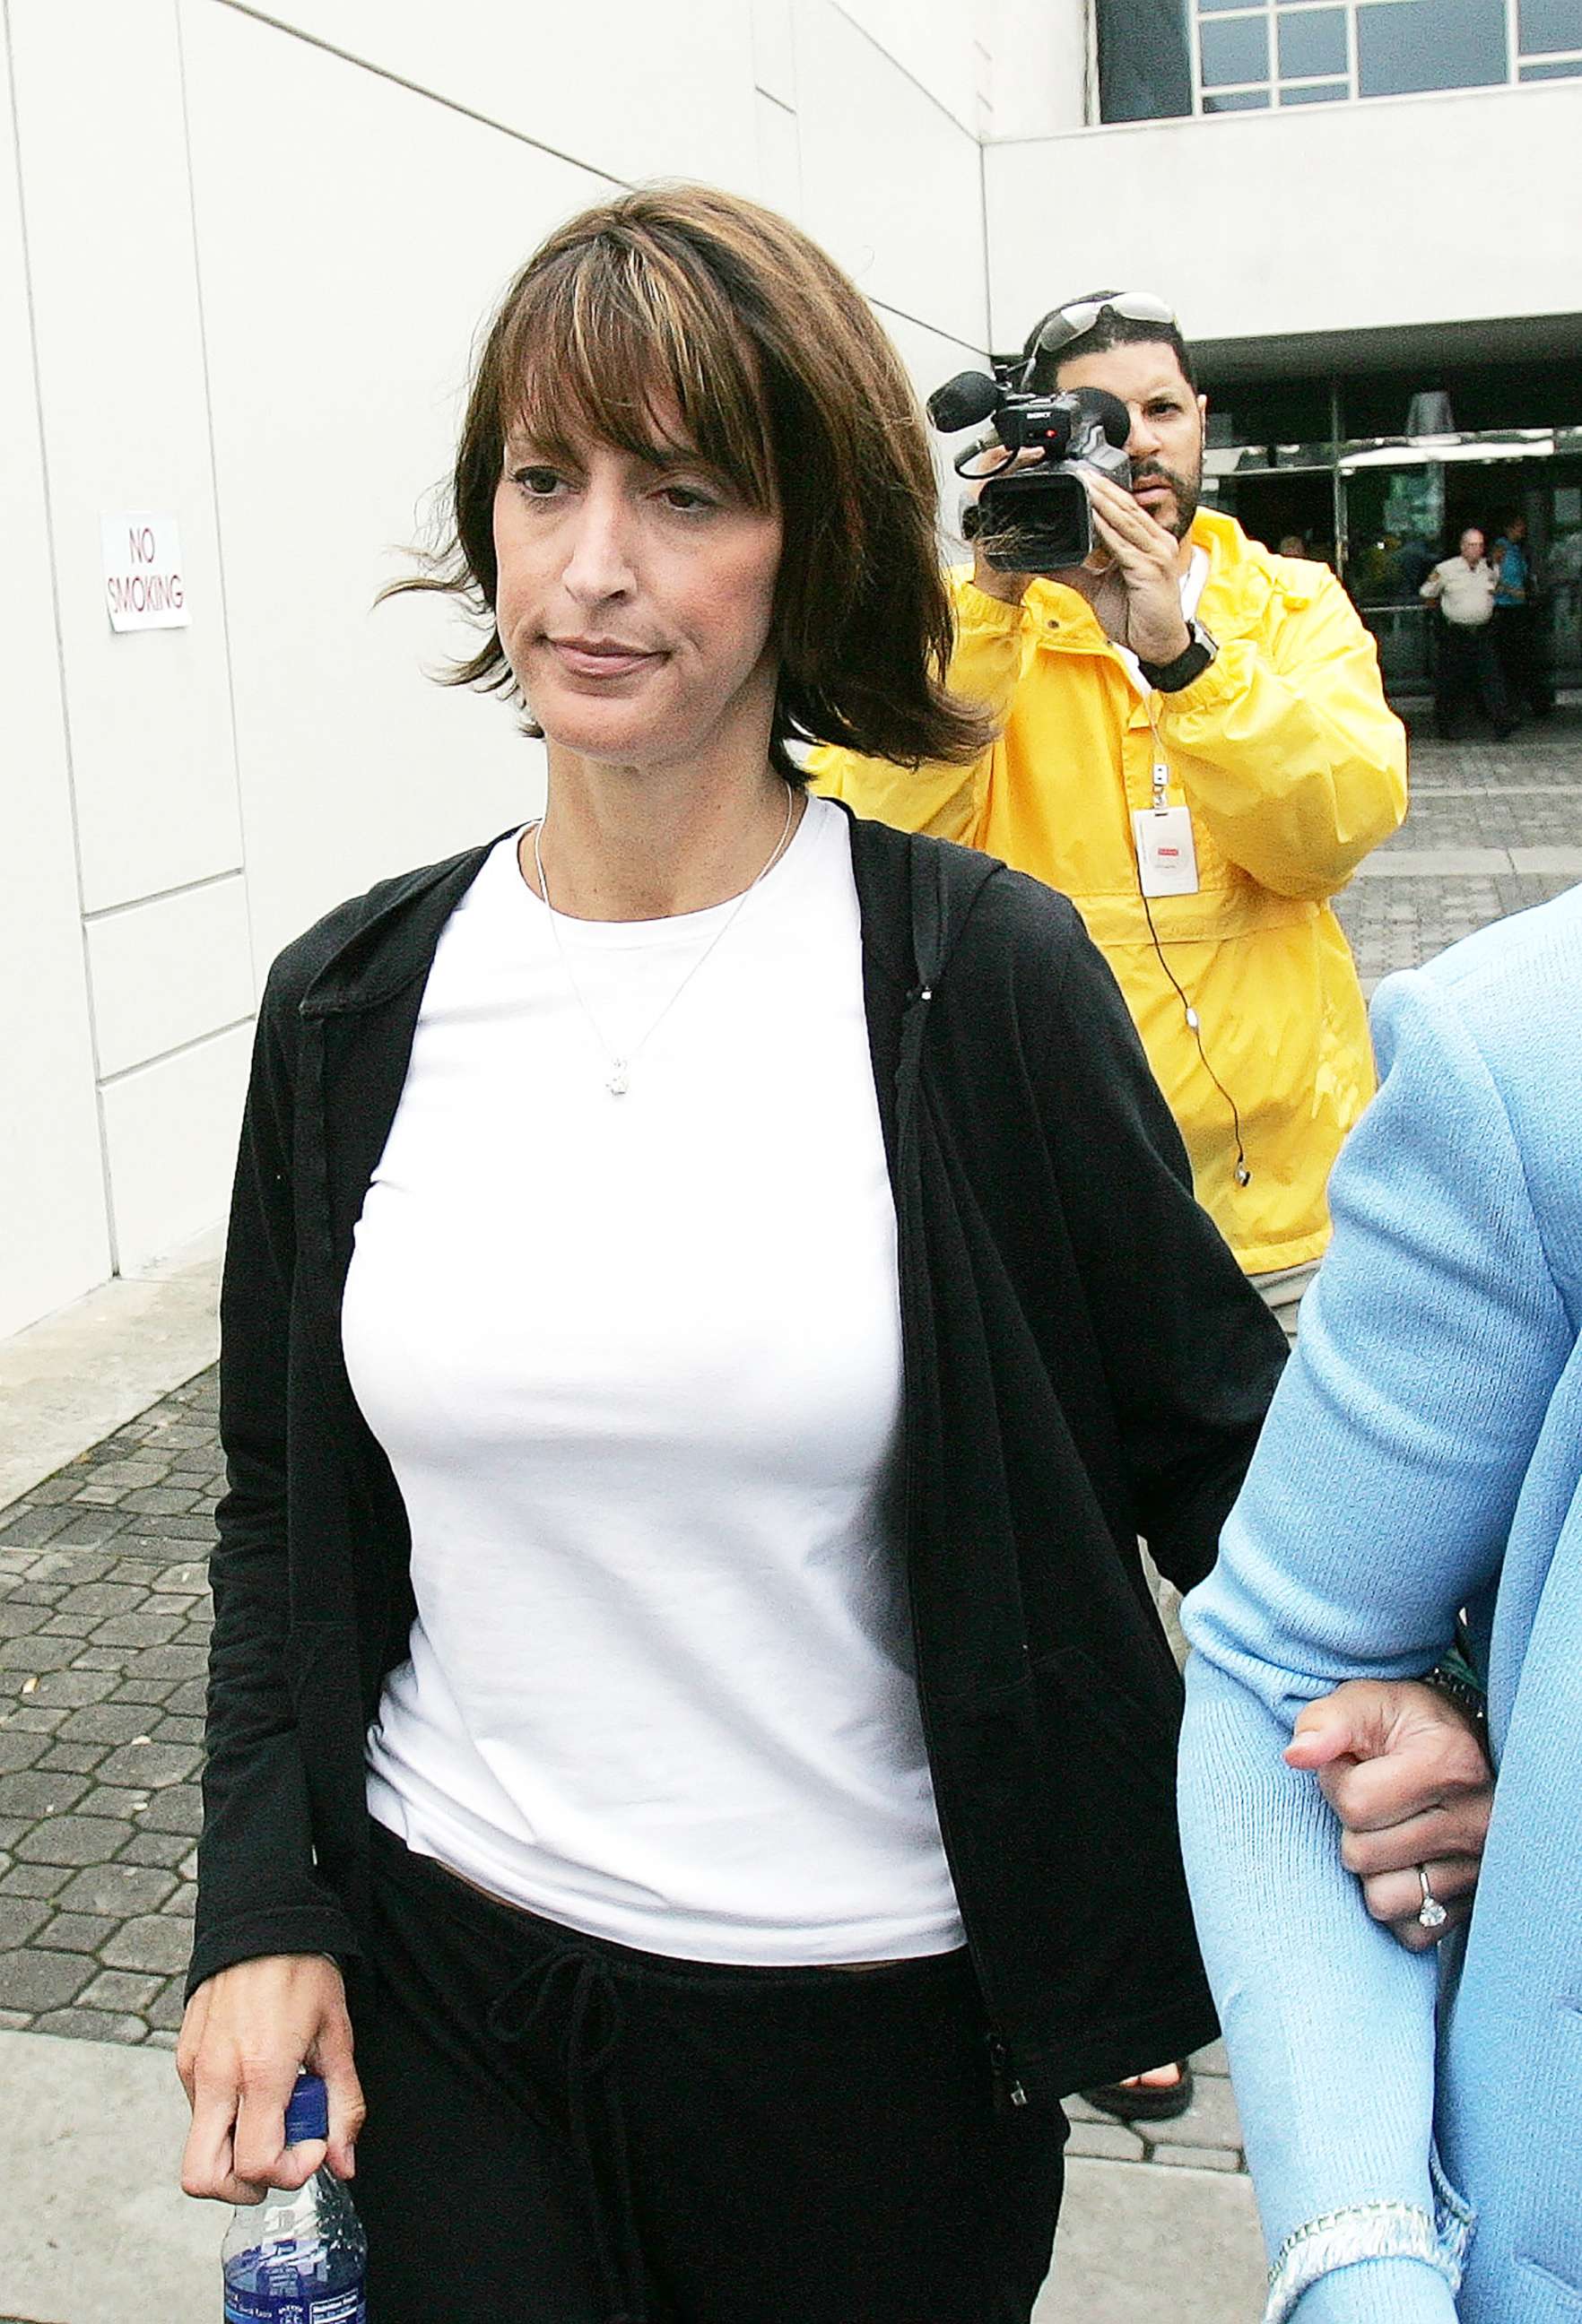 PHOTO: Jennifer Wilbanks, whose disappearance days before her 2005 wedding earned her the moniker "Runaway Bride,"  leaves the Gwinnett County courthouse in Lawrenceville, Ga., June 2, 2005 file photo.